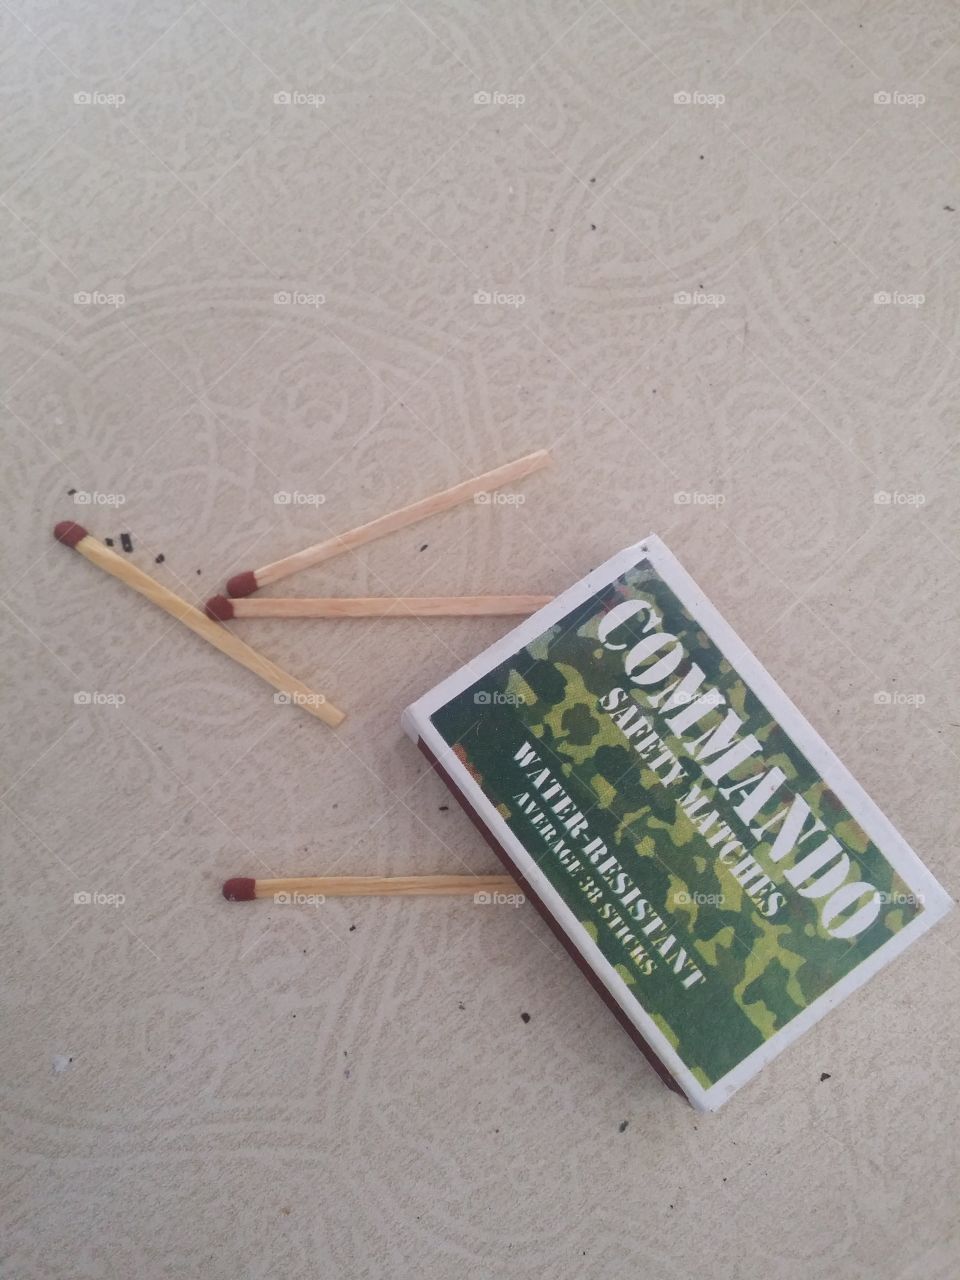 pieces of matches😊😊